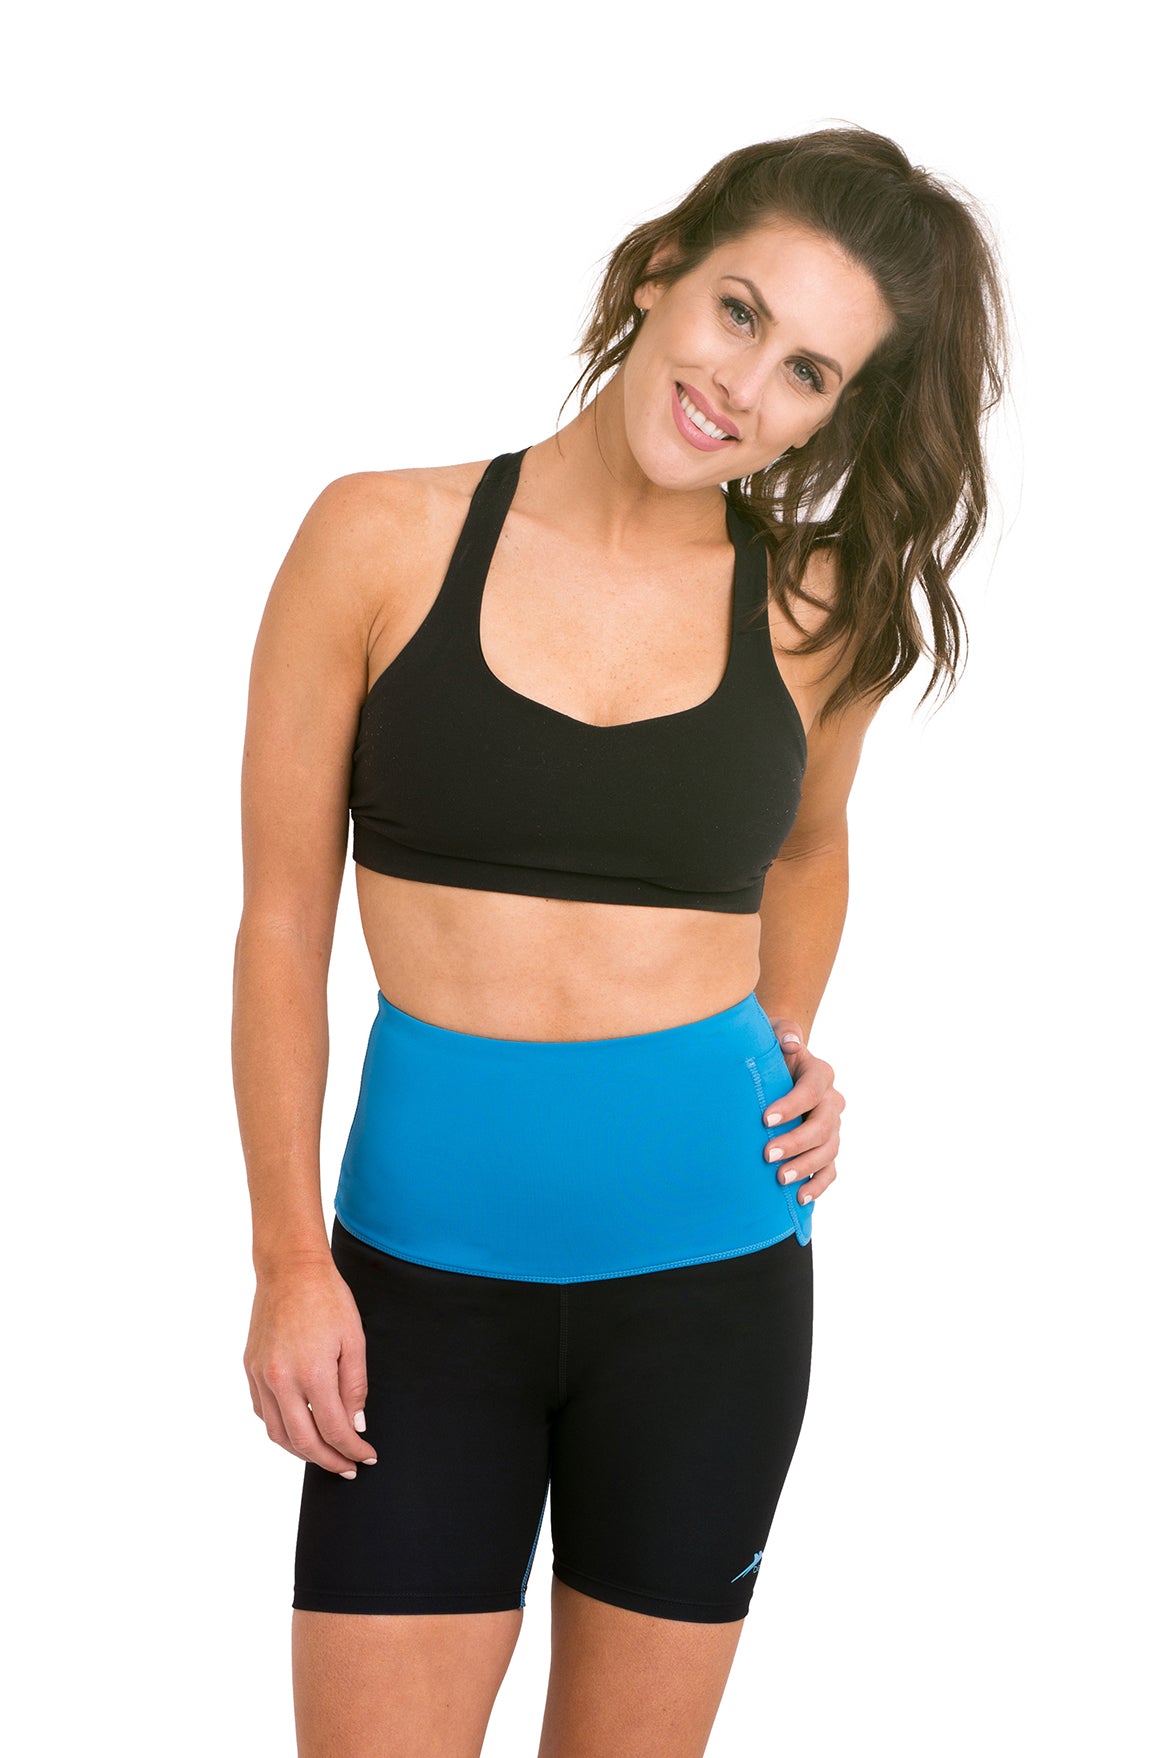 Mineral Infused High Waist Exercise Shorts - Black/Turquoise